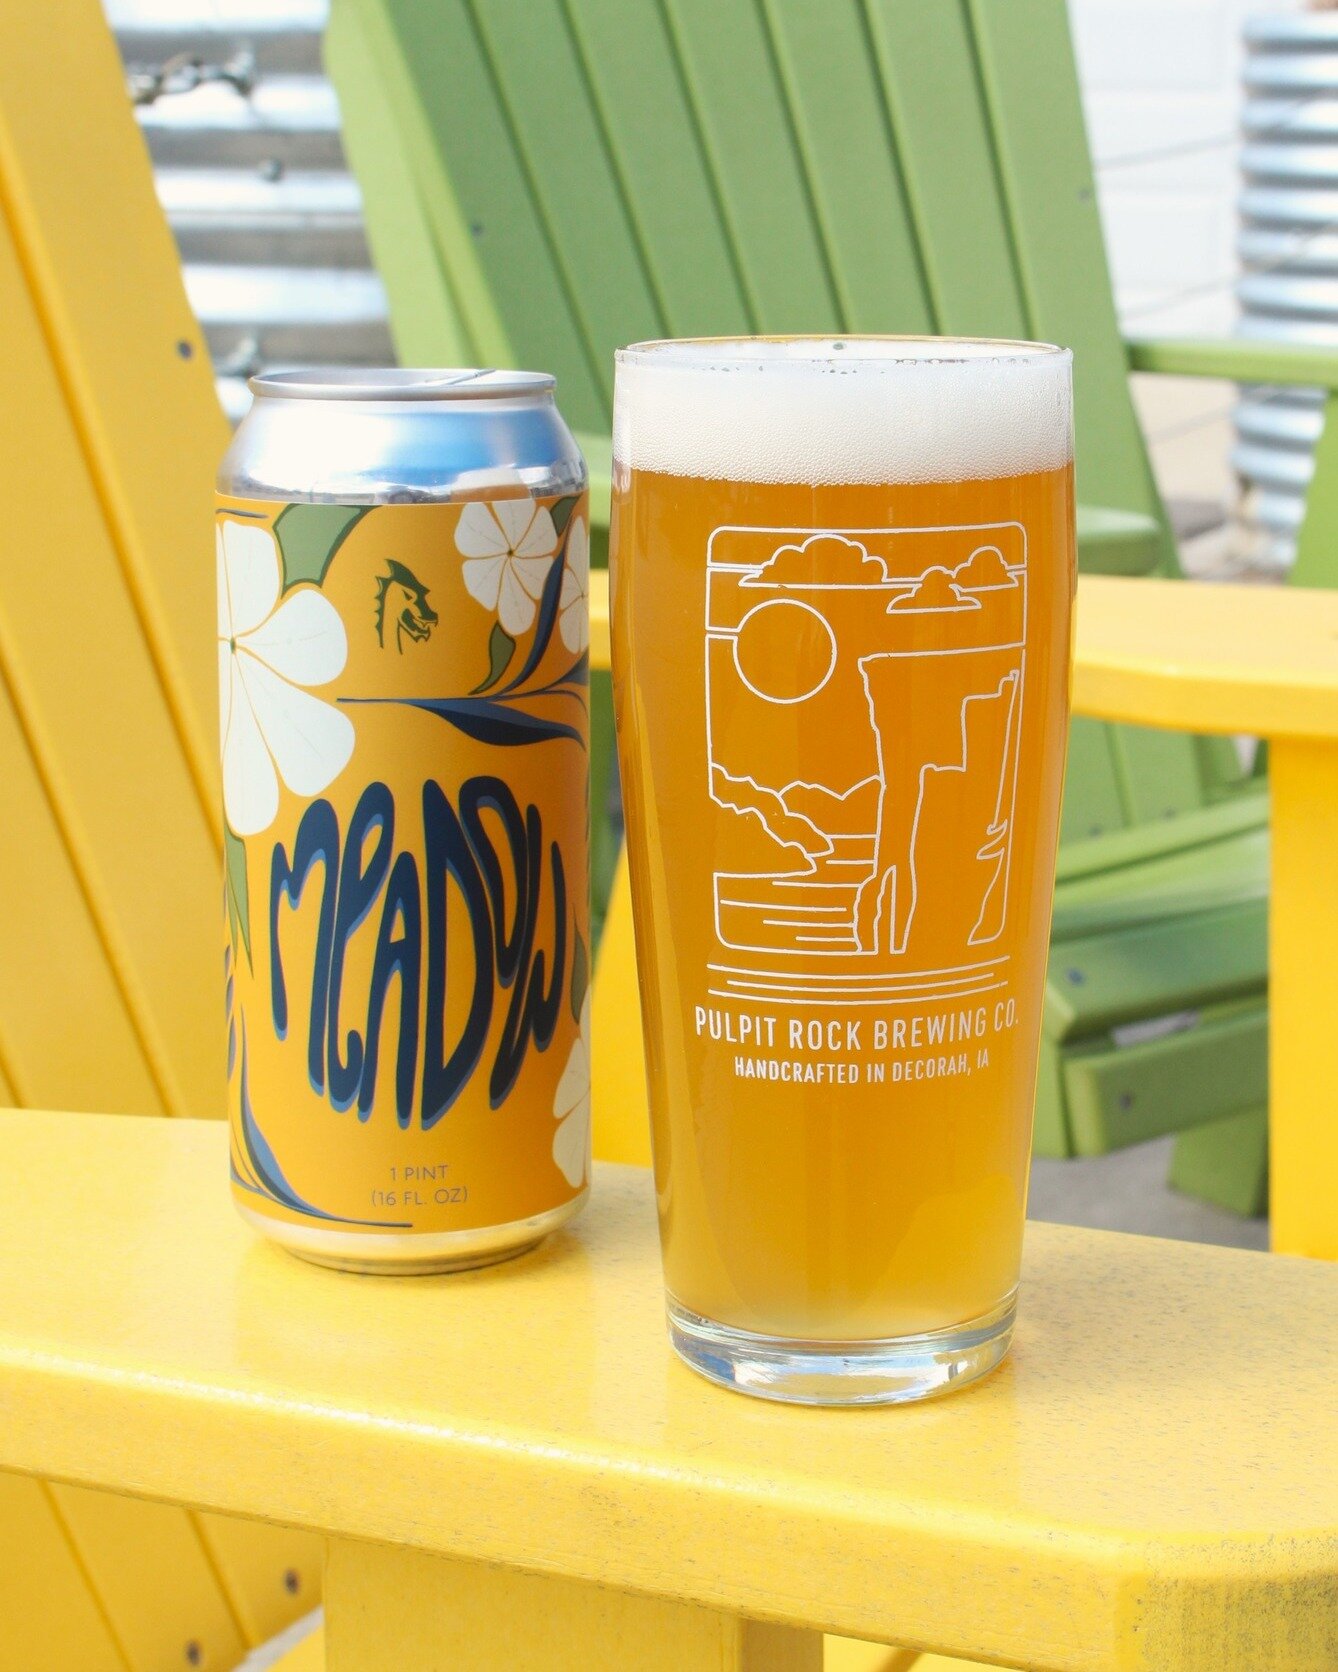 Heading into a busy week? Grab a few cans of Meadow to go. This American ale with wheat is the perfect beer to sip on and relax with.
We hope you have a great start to your week! 🍻